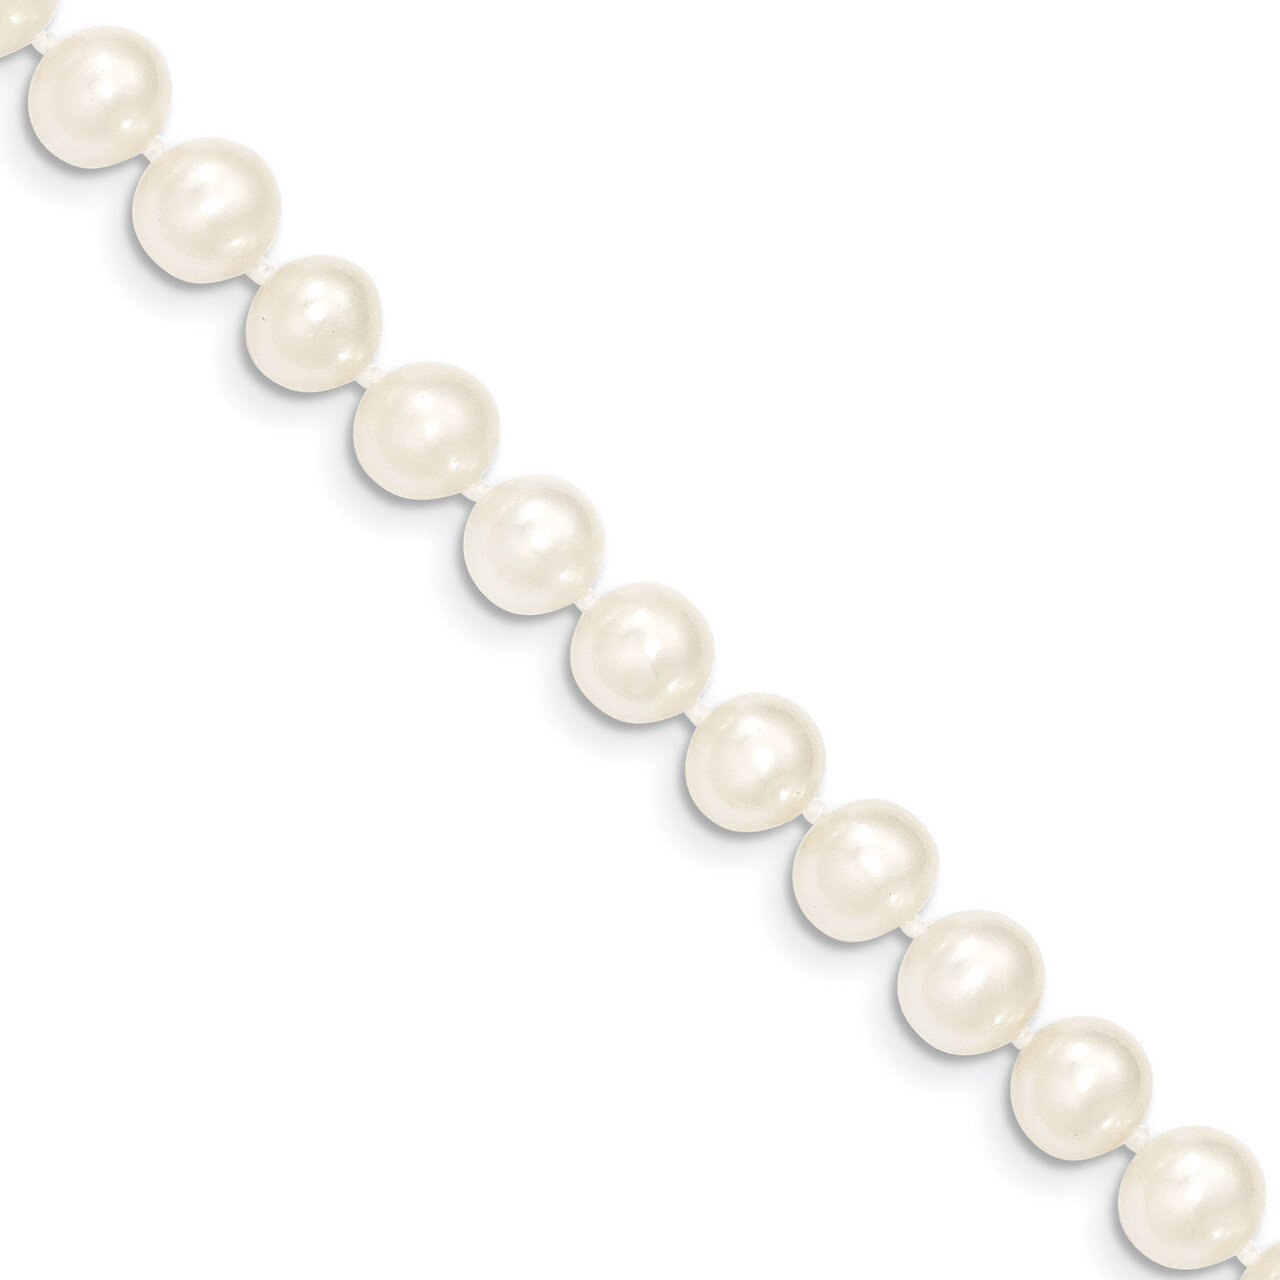 7-8mm White Cultured Near Round Pearl Necklace 20 Inch 14k Gold WPN070-20